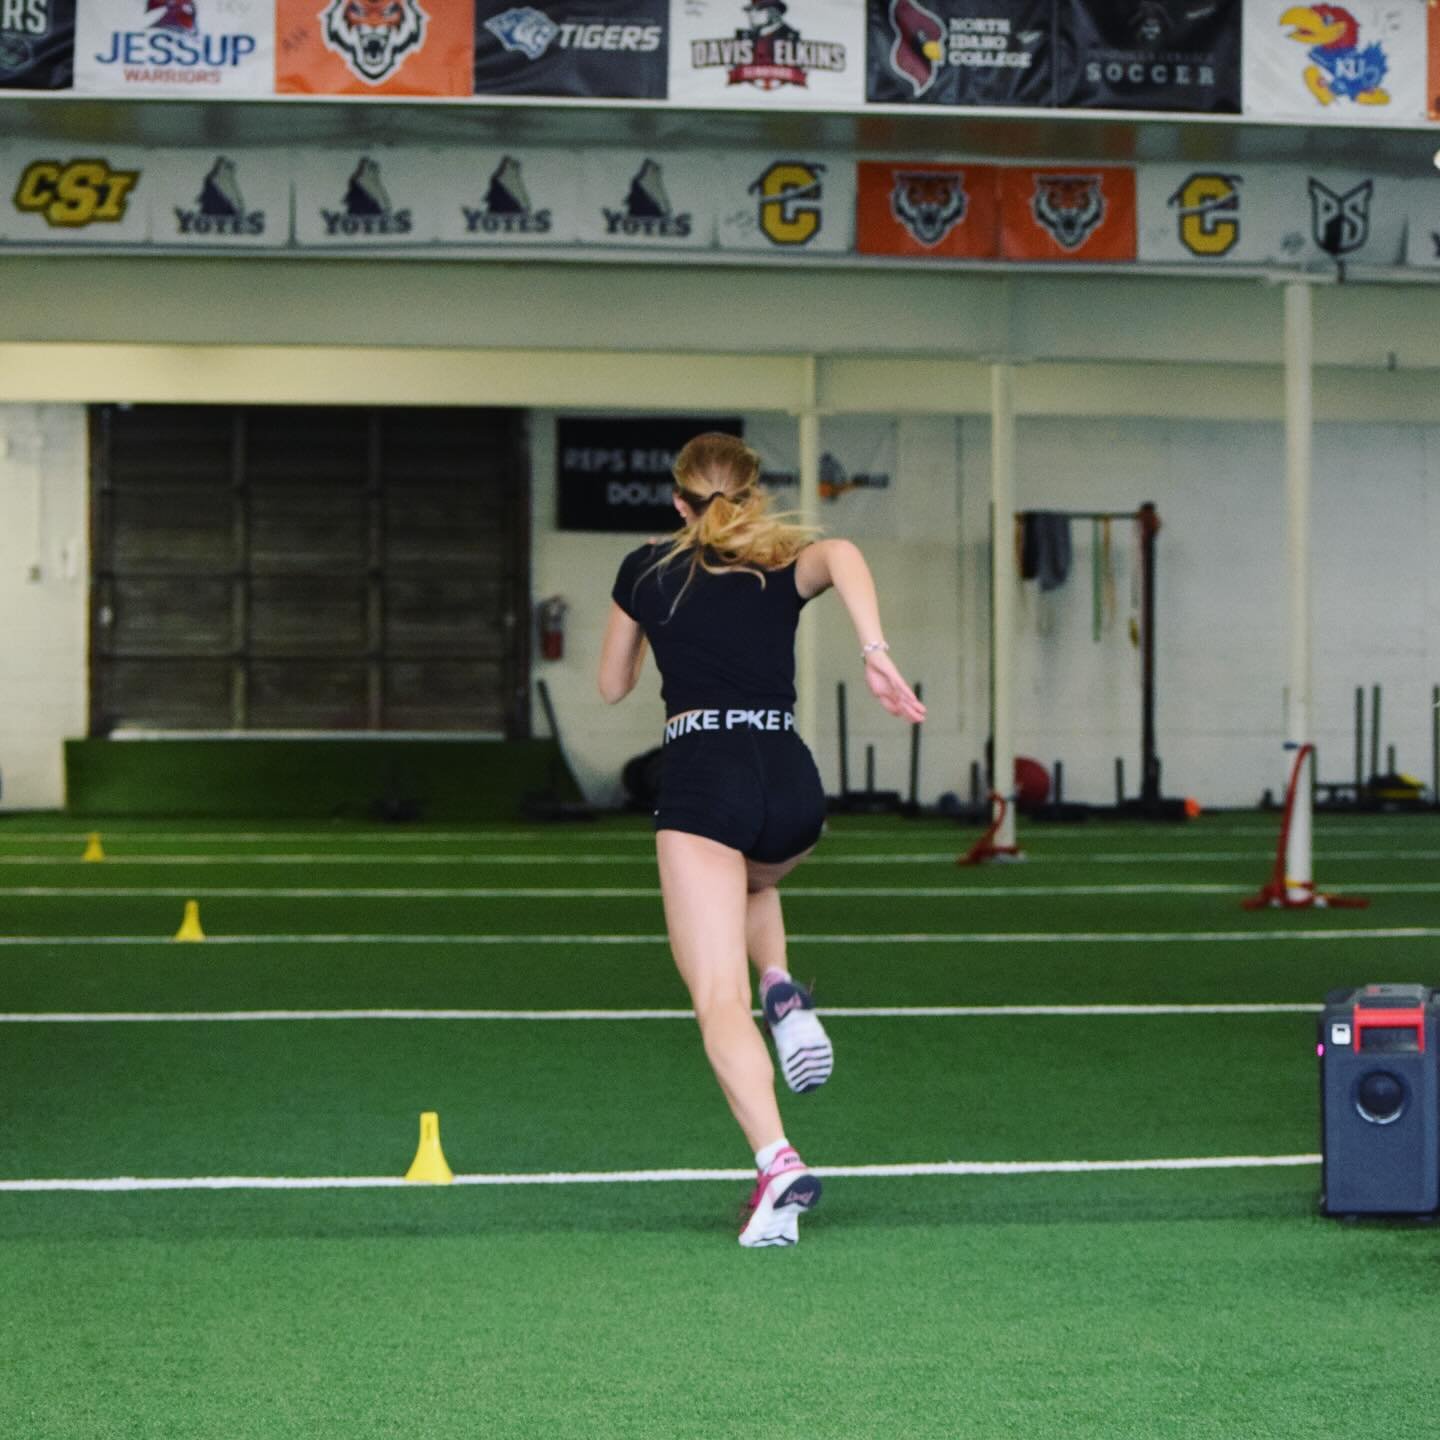 Testing. Part of our onboarding process includes 1-on-1 training culminating with a testing day before joining into groups.

This allows us to set a baseline and document imbalances, strength, and weaknesses for each athlete.

We continue to test spe